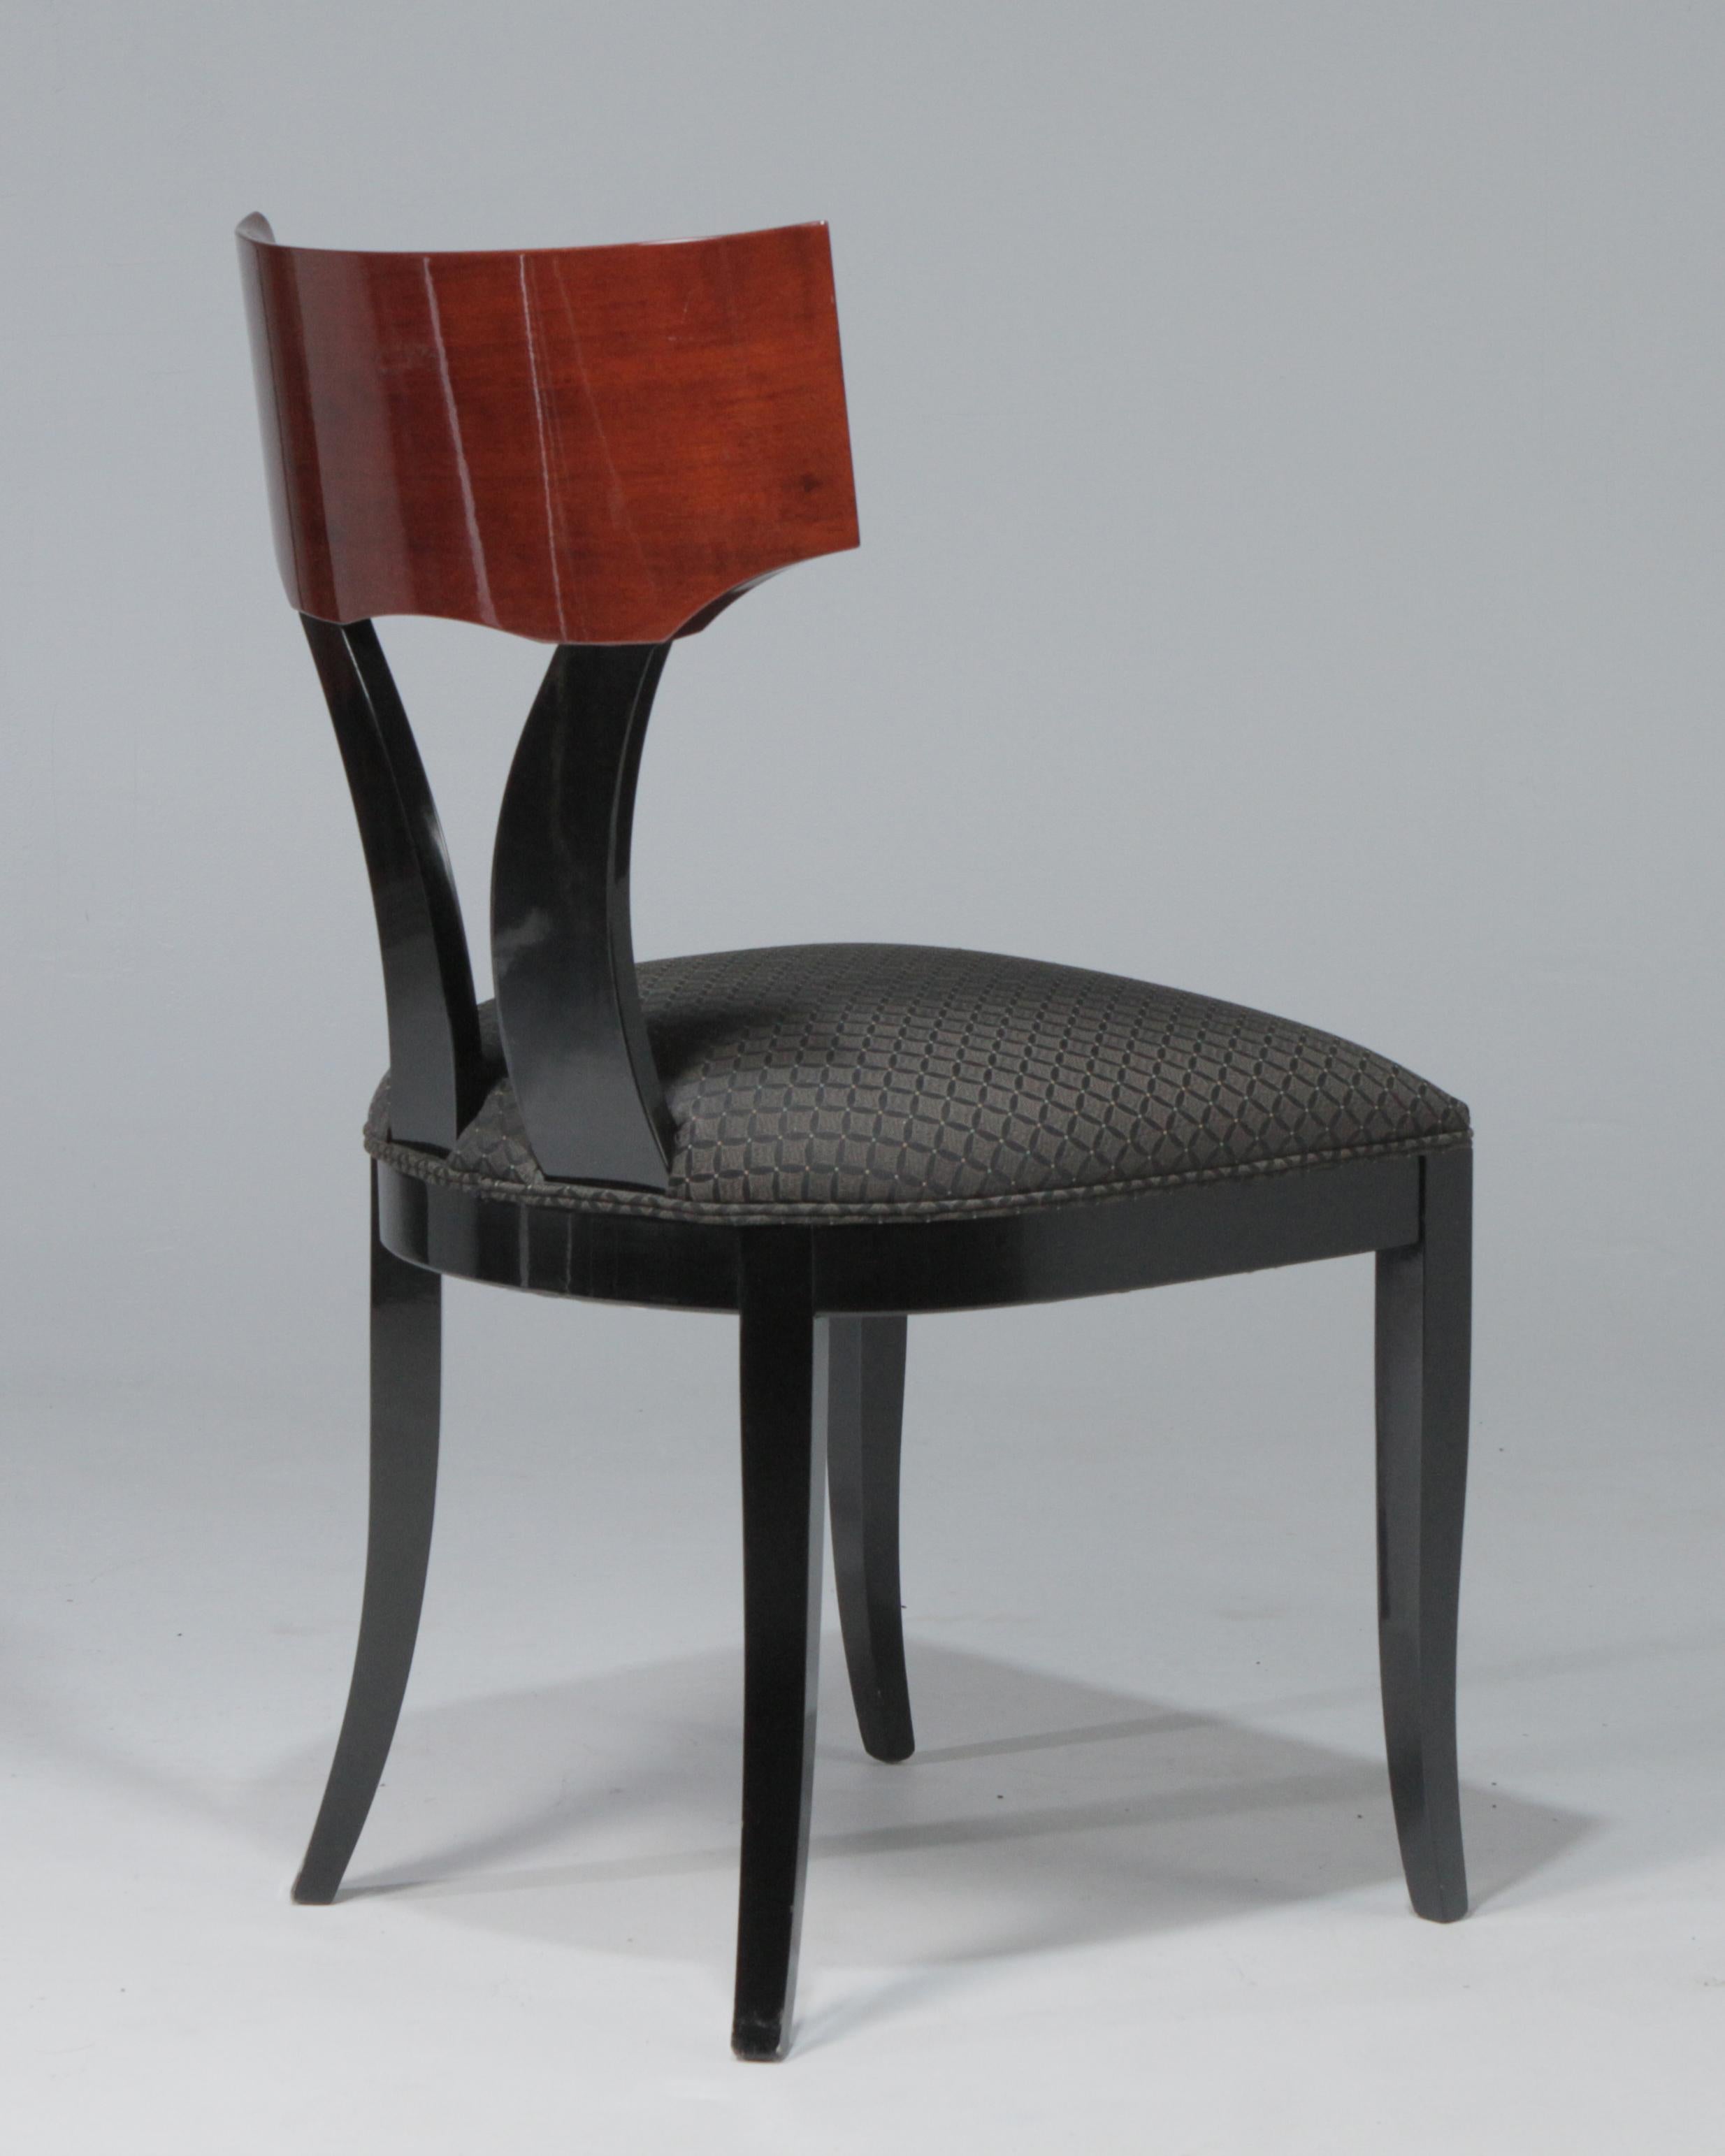 A stunning set of ten Pietro Constantini for Ello Klismos style dining chairs. The chairs are two-tone with solid black lacquer bases and clear red backs that show the wood grain, so each chair back is unique. The fabric seats are original.